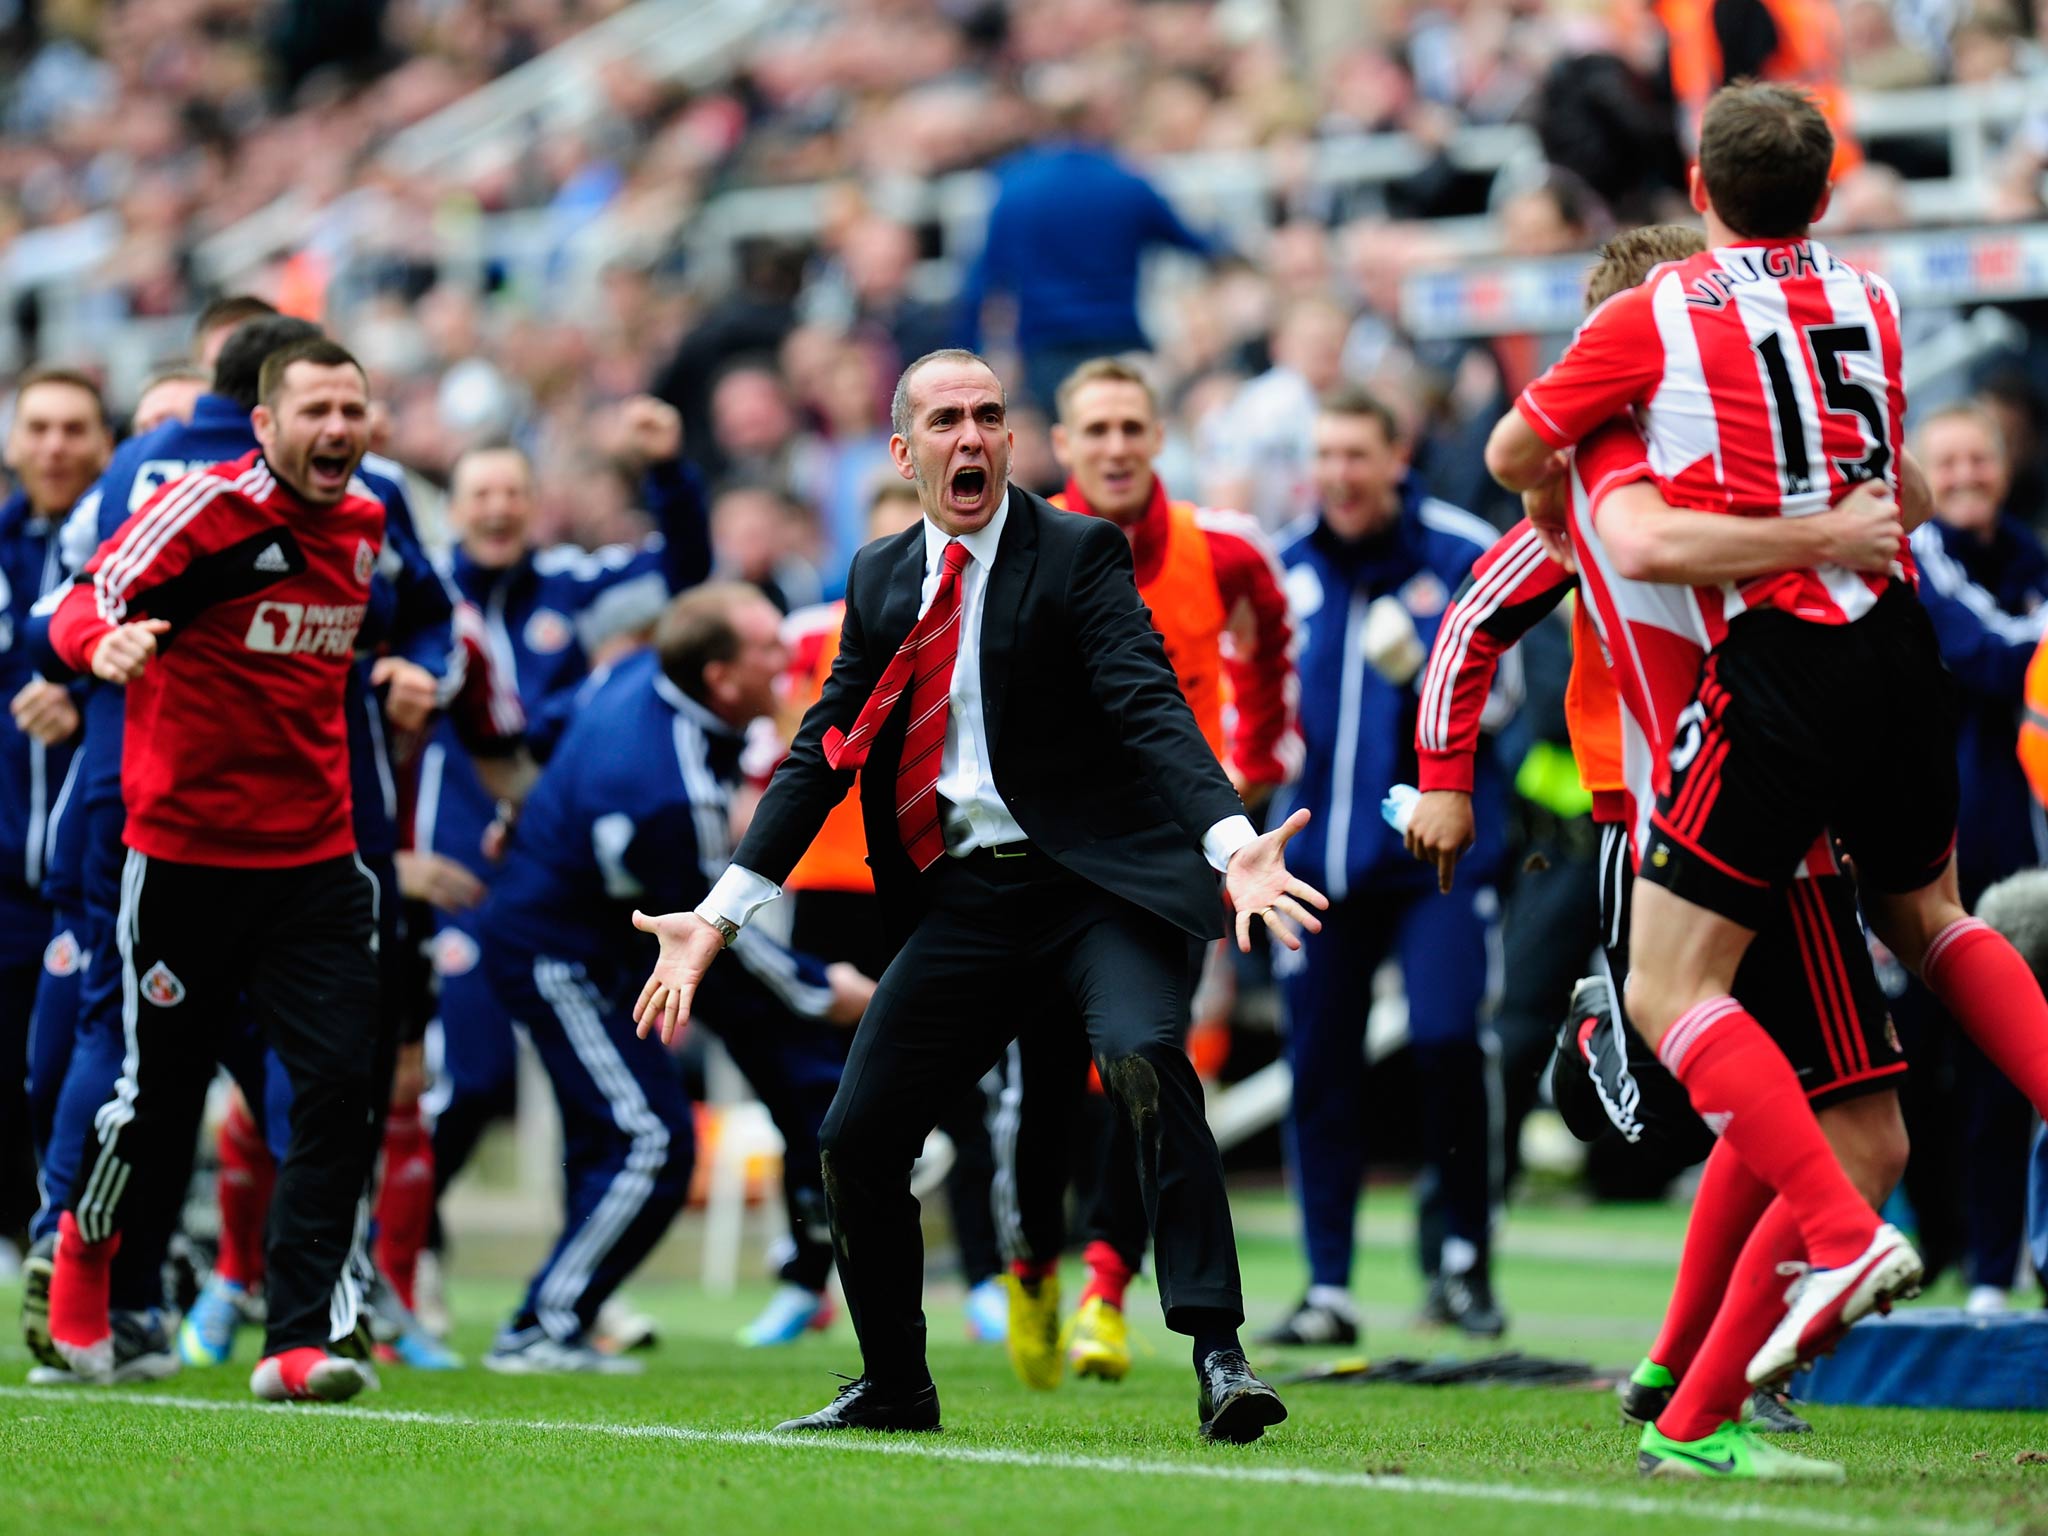 Paolo Di Canio celebrates during Sunderland's victory over Newcastle in the Premier League at St James' Park